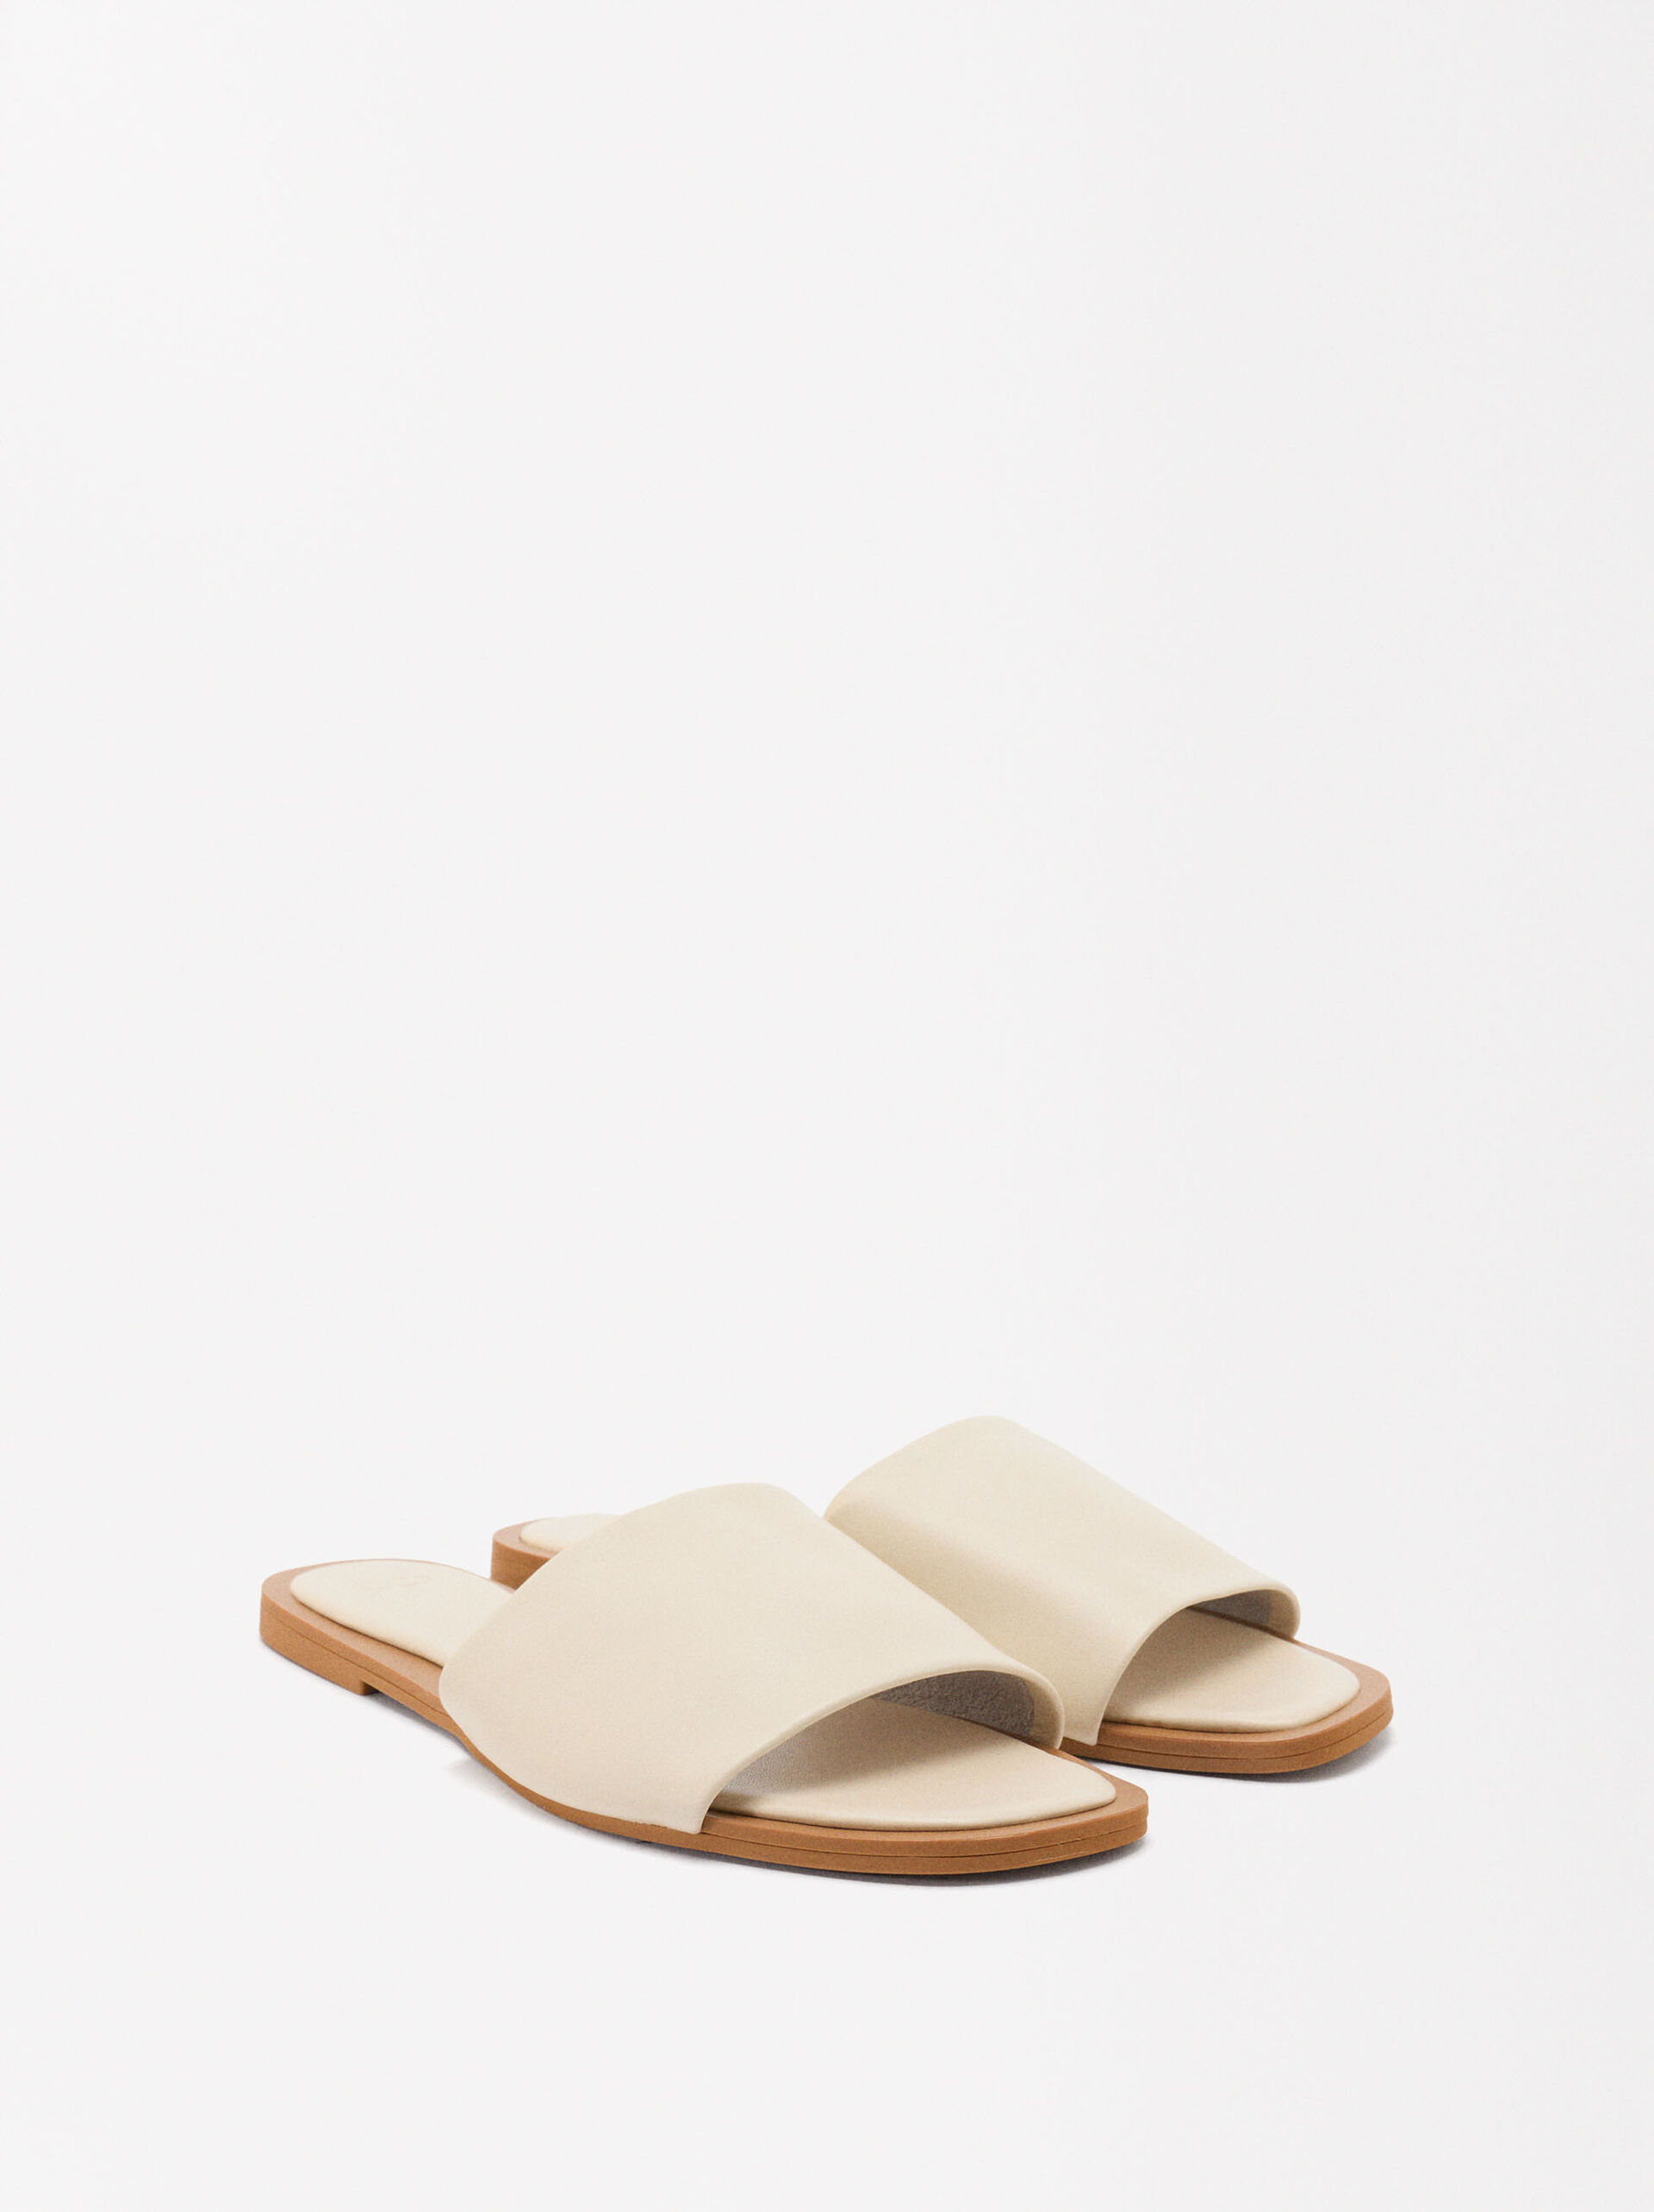 Napa Leather Sandals image number 3.0